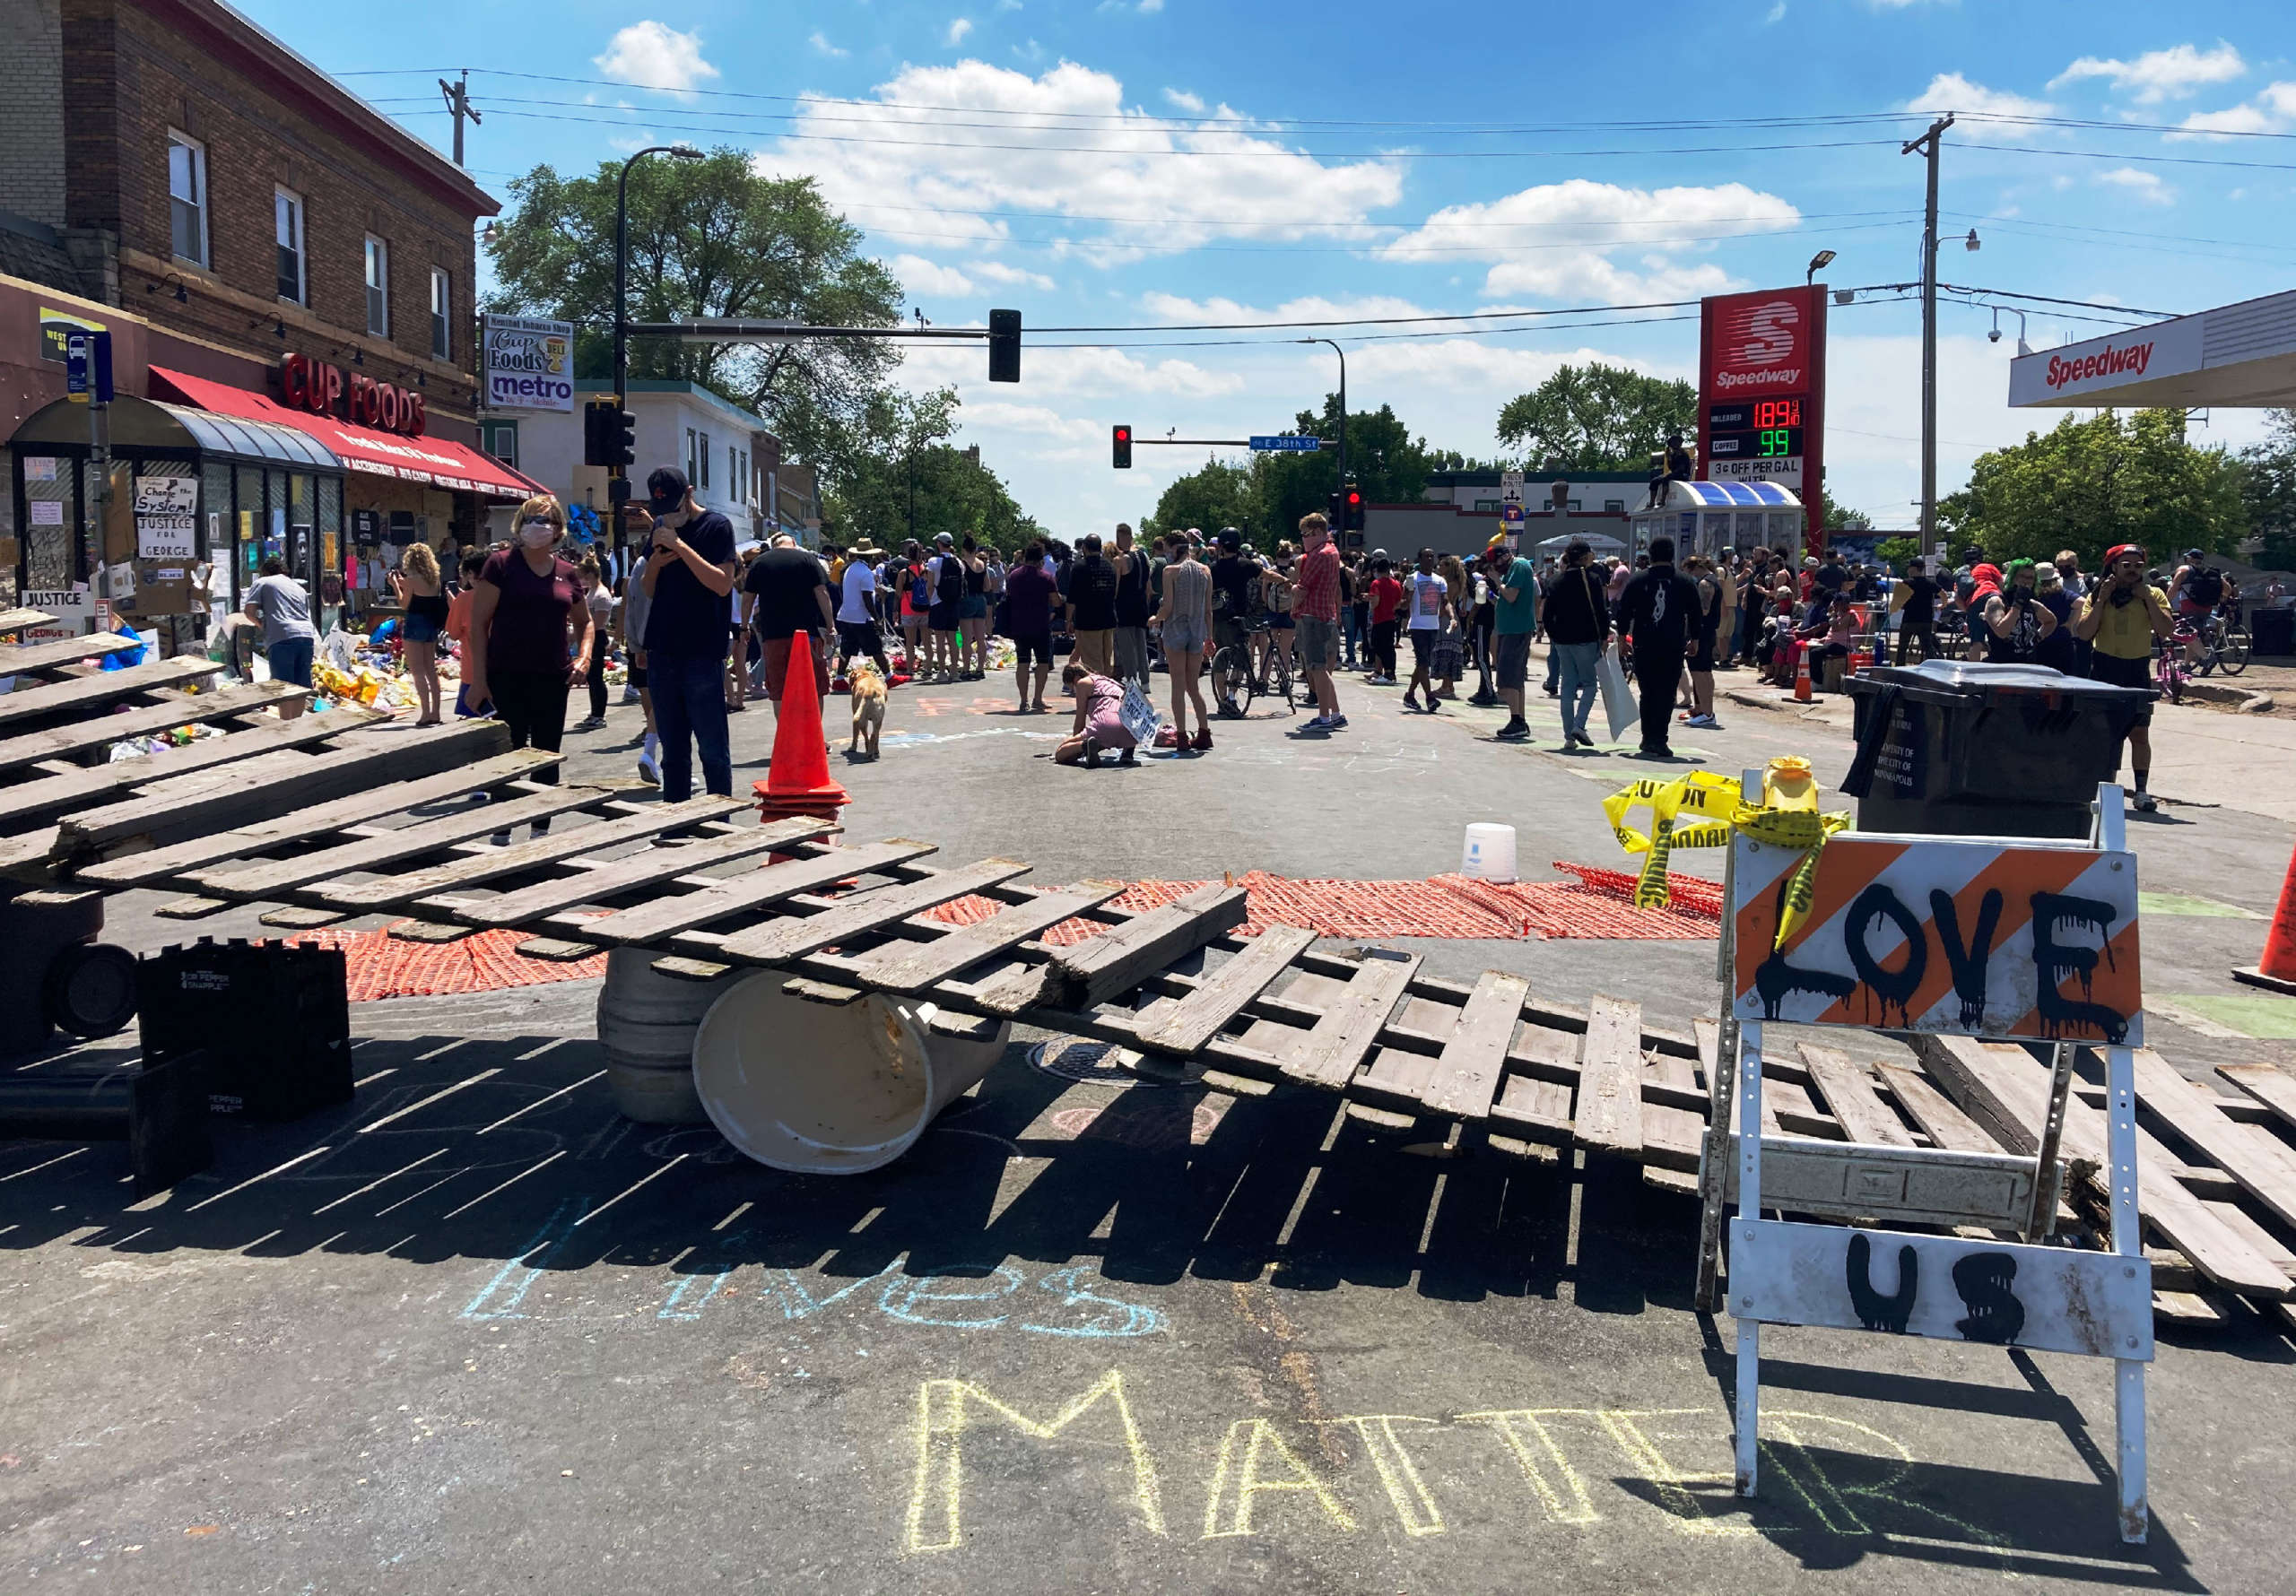 People gathered Monday at a vigil on the street corner in south Minneapolis where police killed George Floyd one week ago.